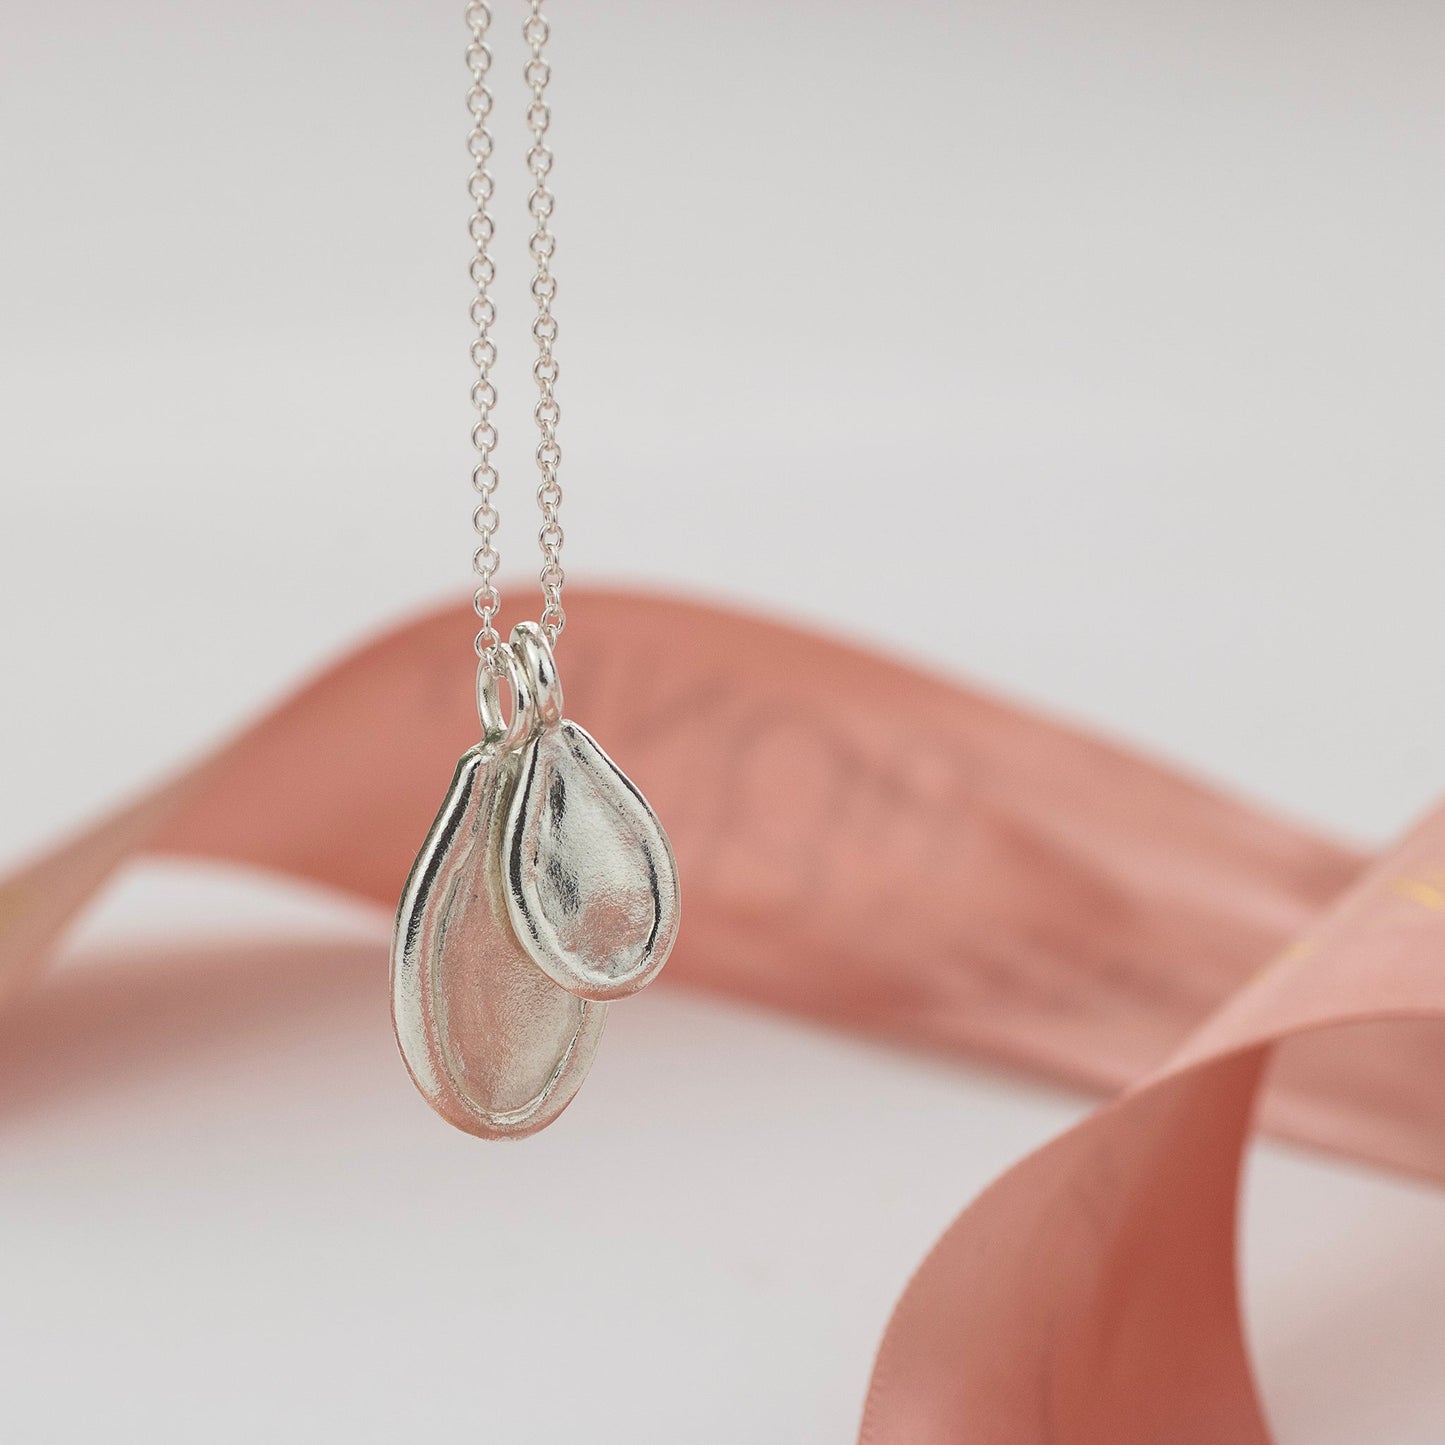 Gift for Mum - Double Seed Necklace - Silver